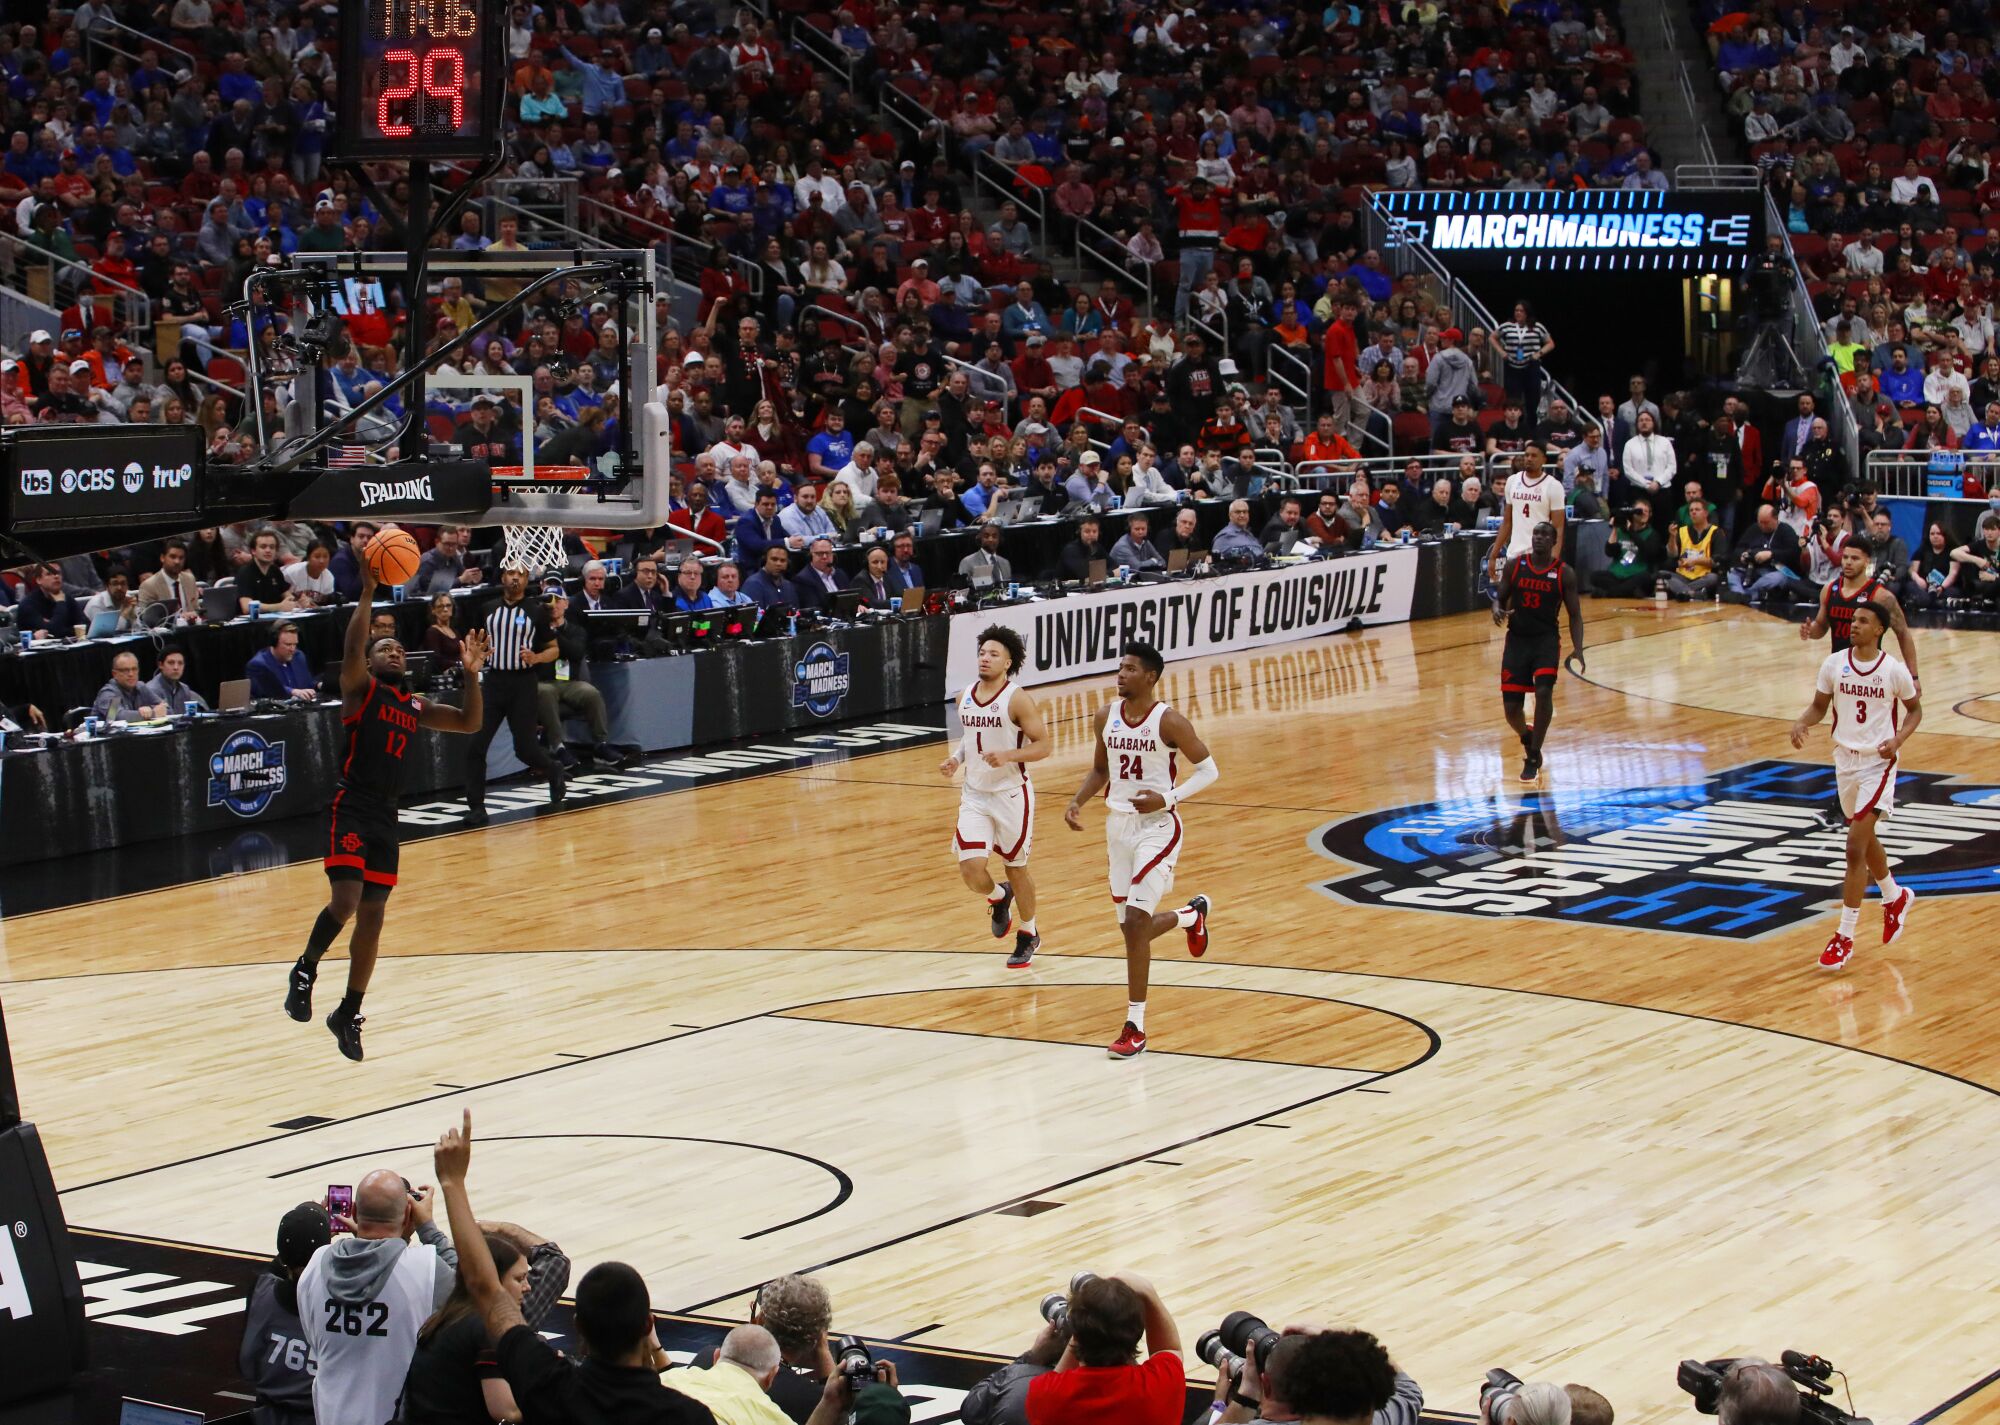 San Diego State's Darrion Trammell stole the ball and then scored from Alabama's Mark Sears.